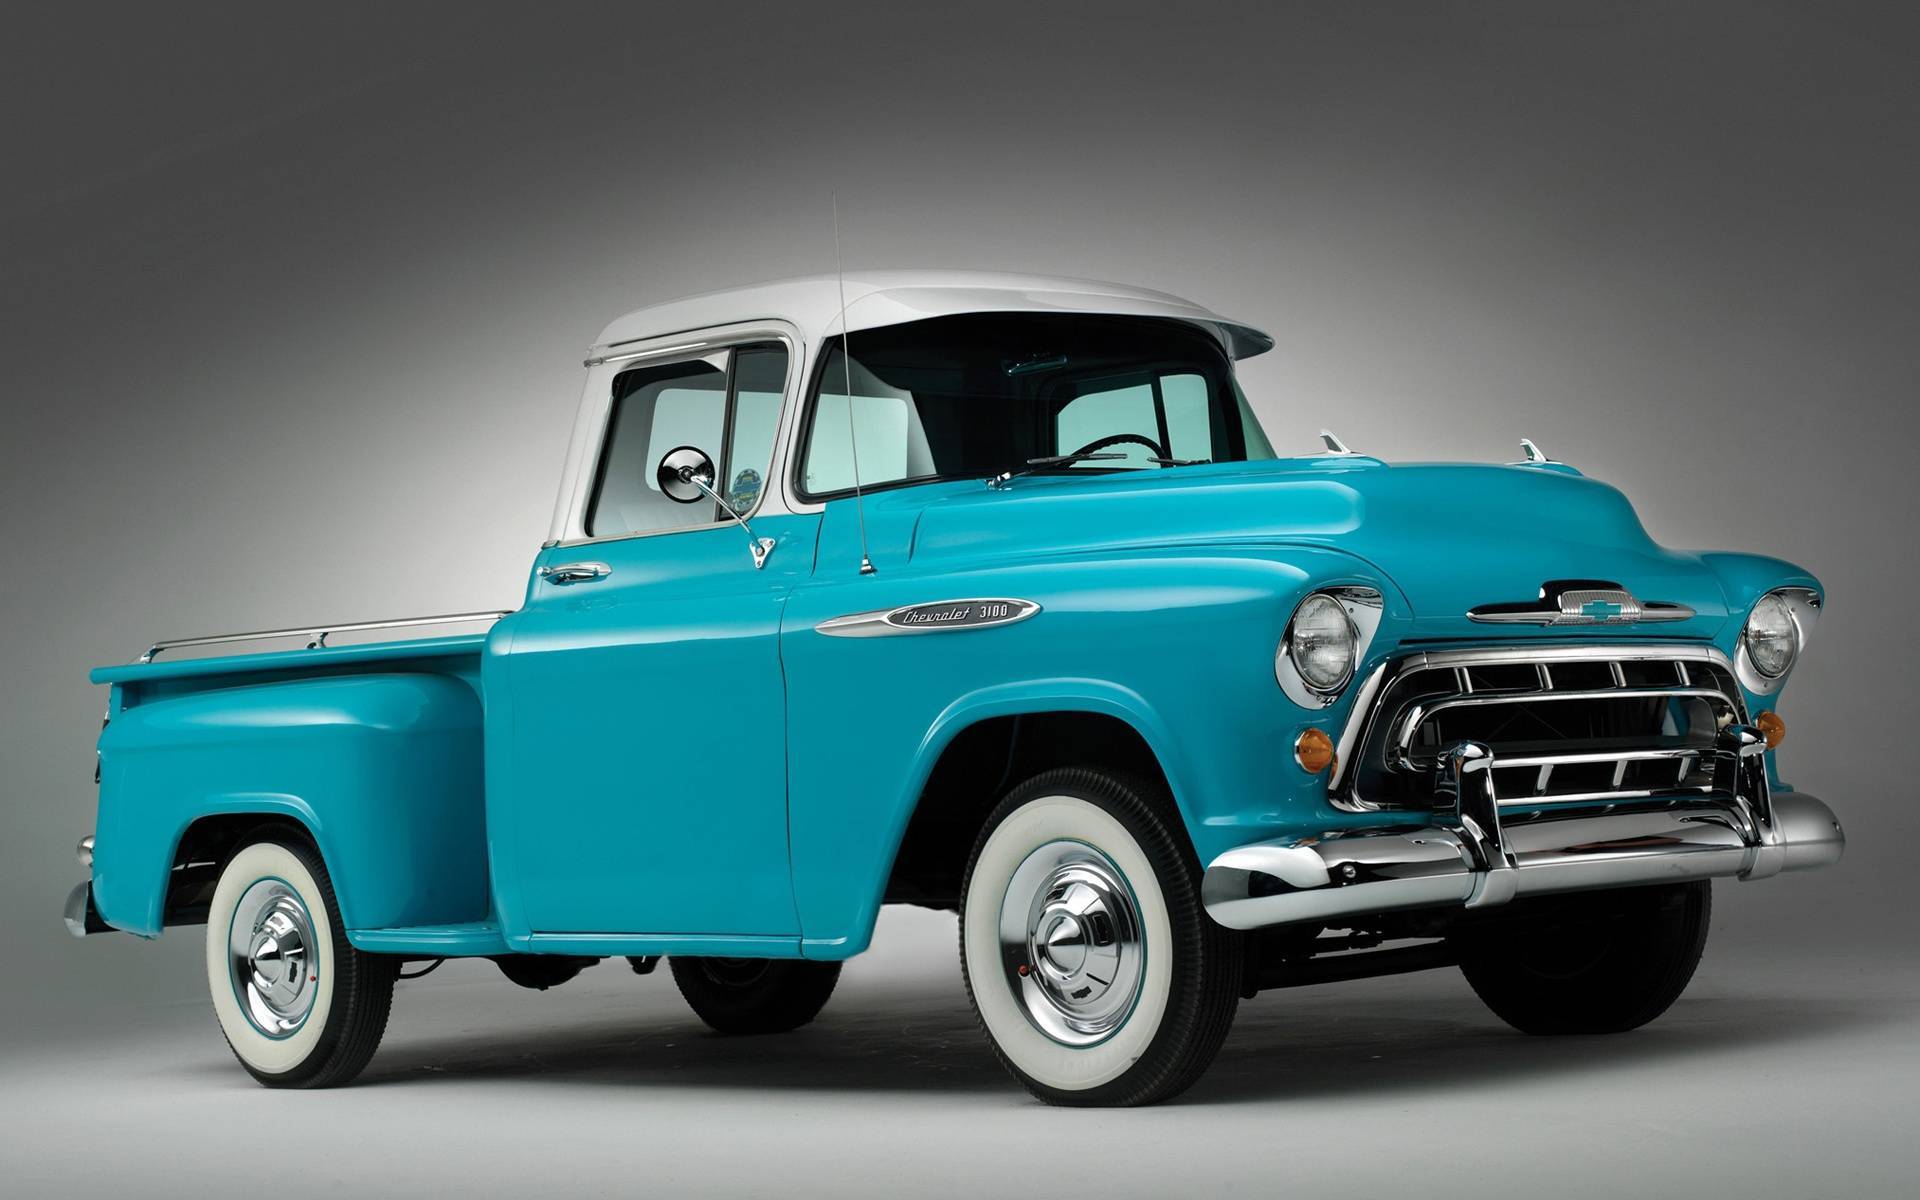 image For > 57 Chevy Truck Wallpaper